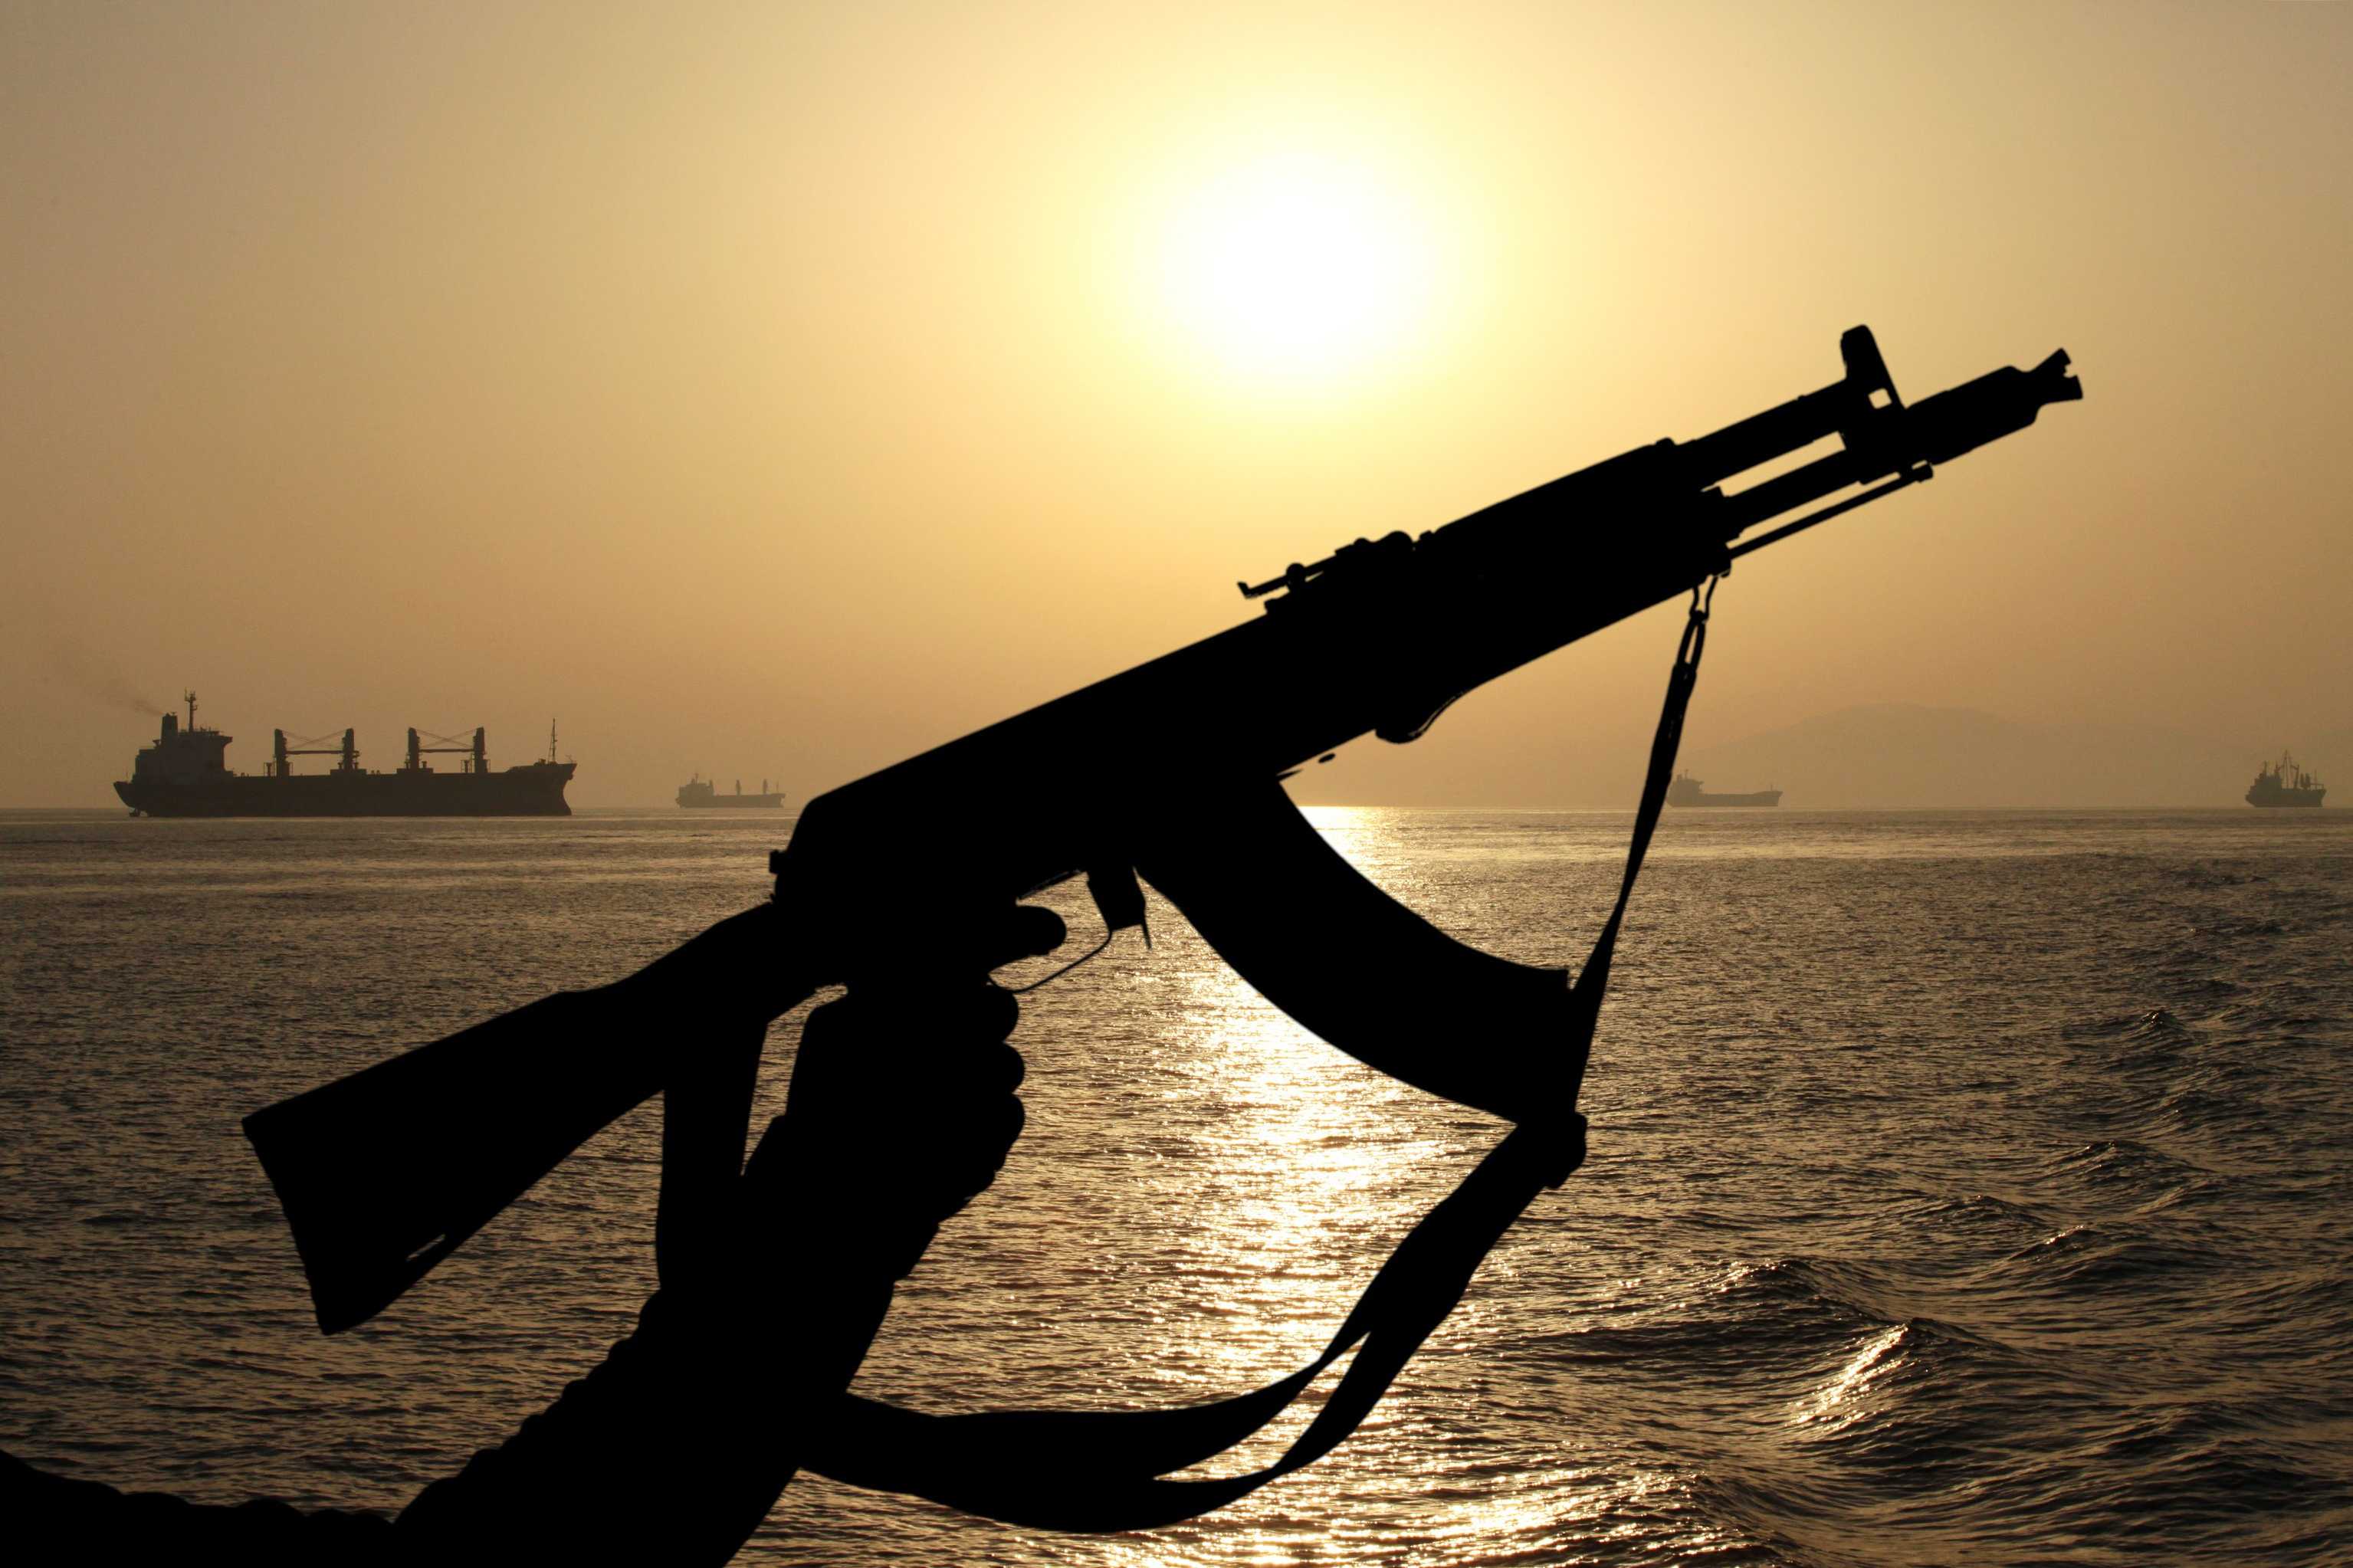 Pirate AK47 with ship in background